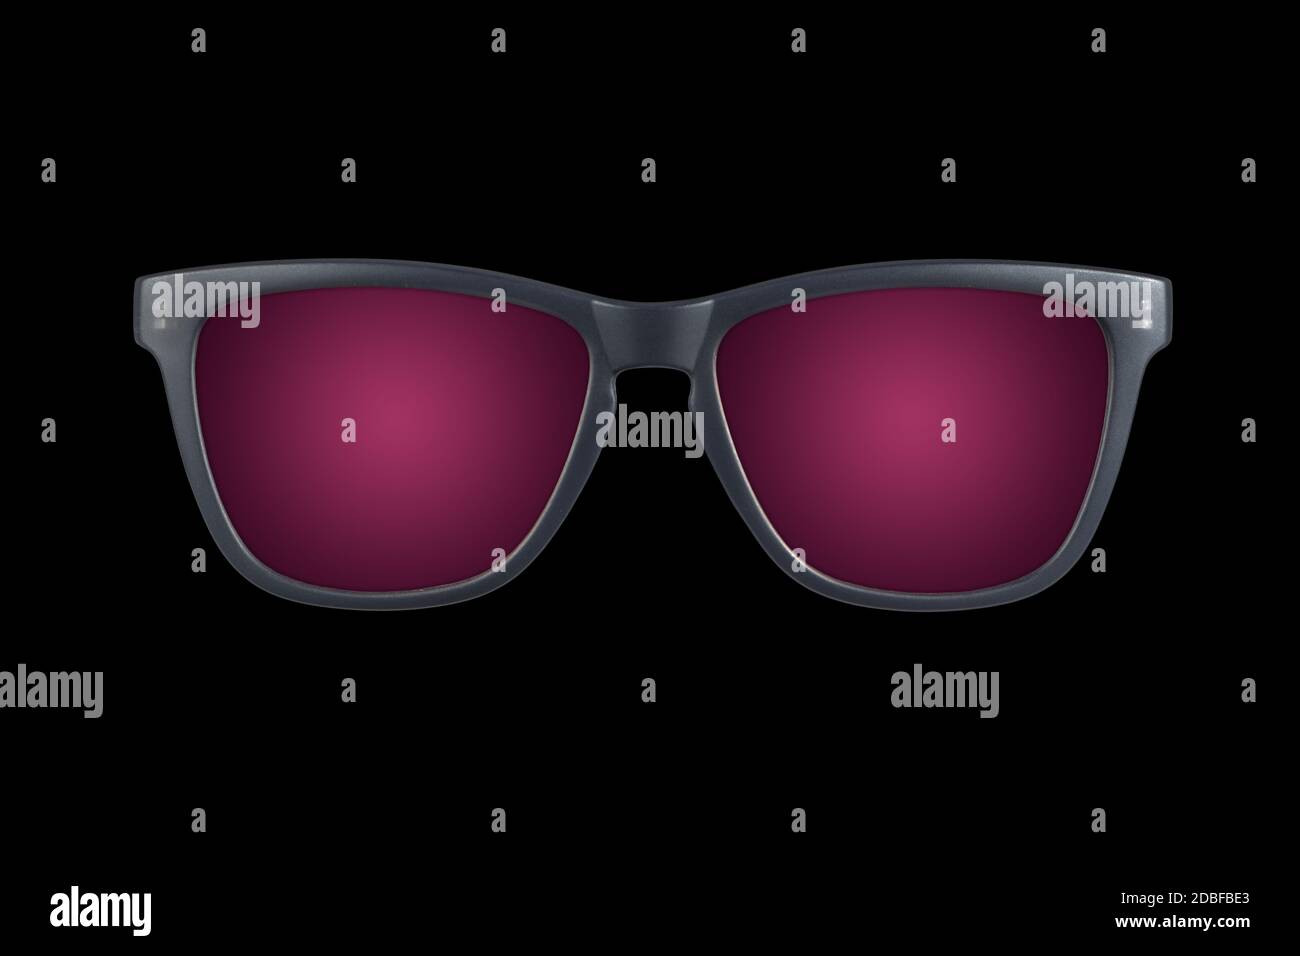 A pair of grey sunglasses with purple lenses on black background Stock Photo